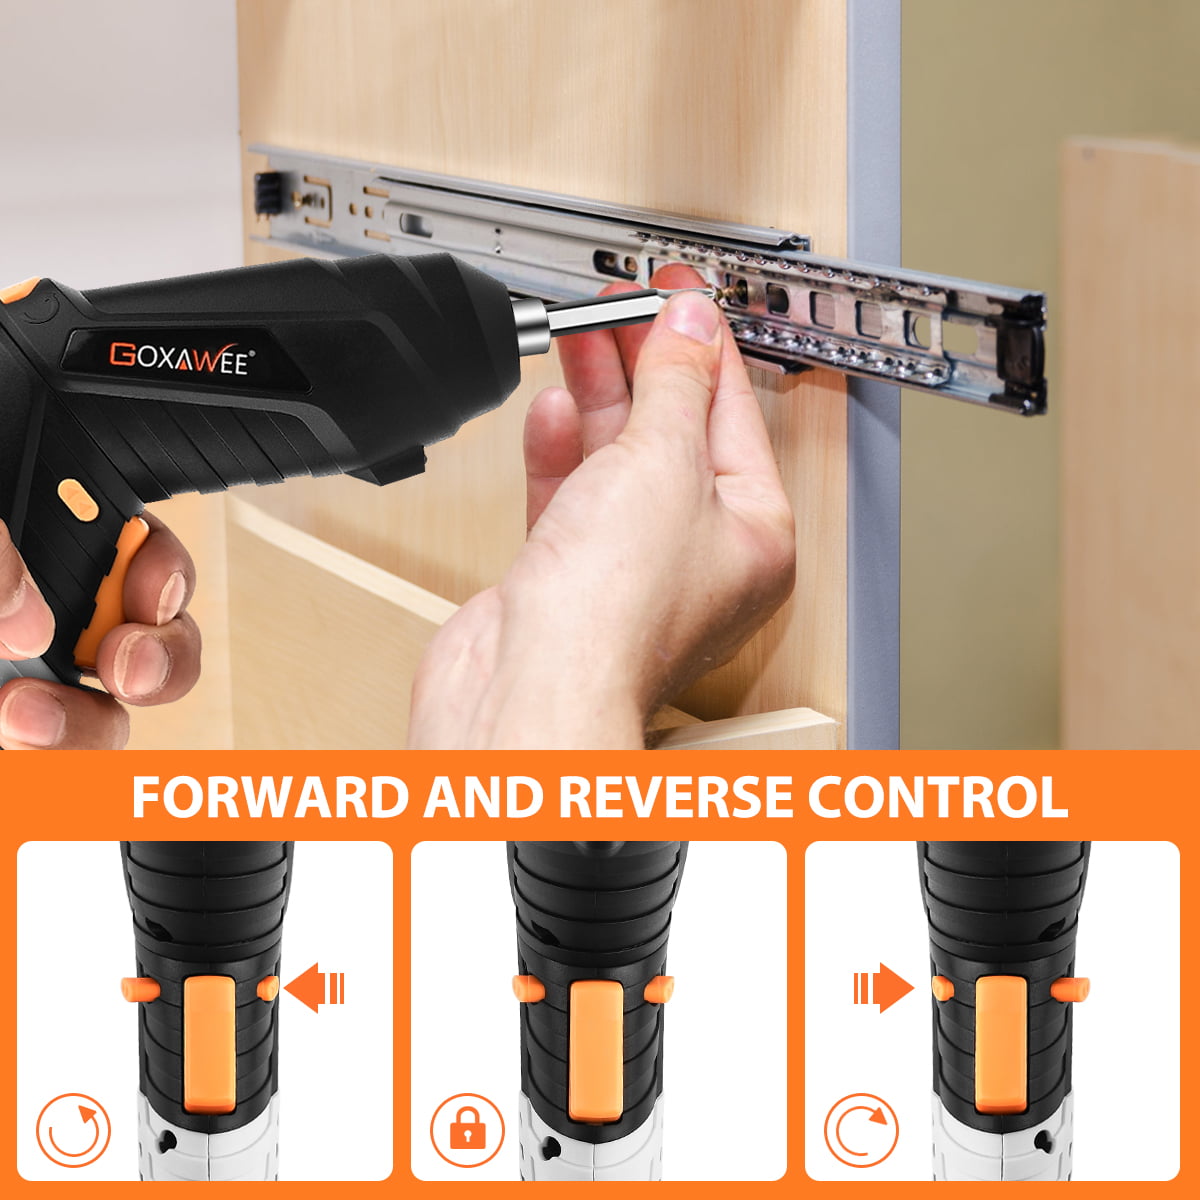 Electric Goddess Electric Drill Cordless Screwdriver Lithium